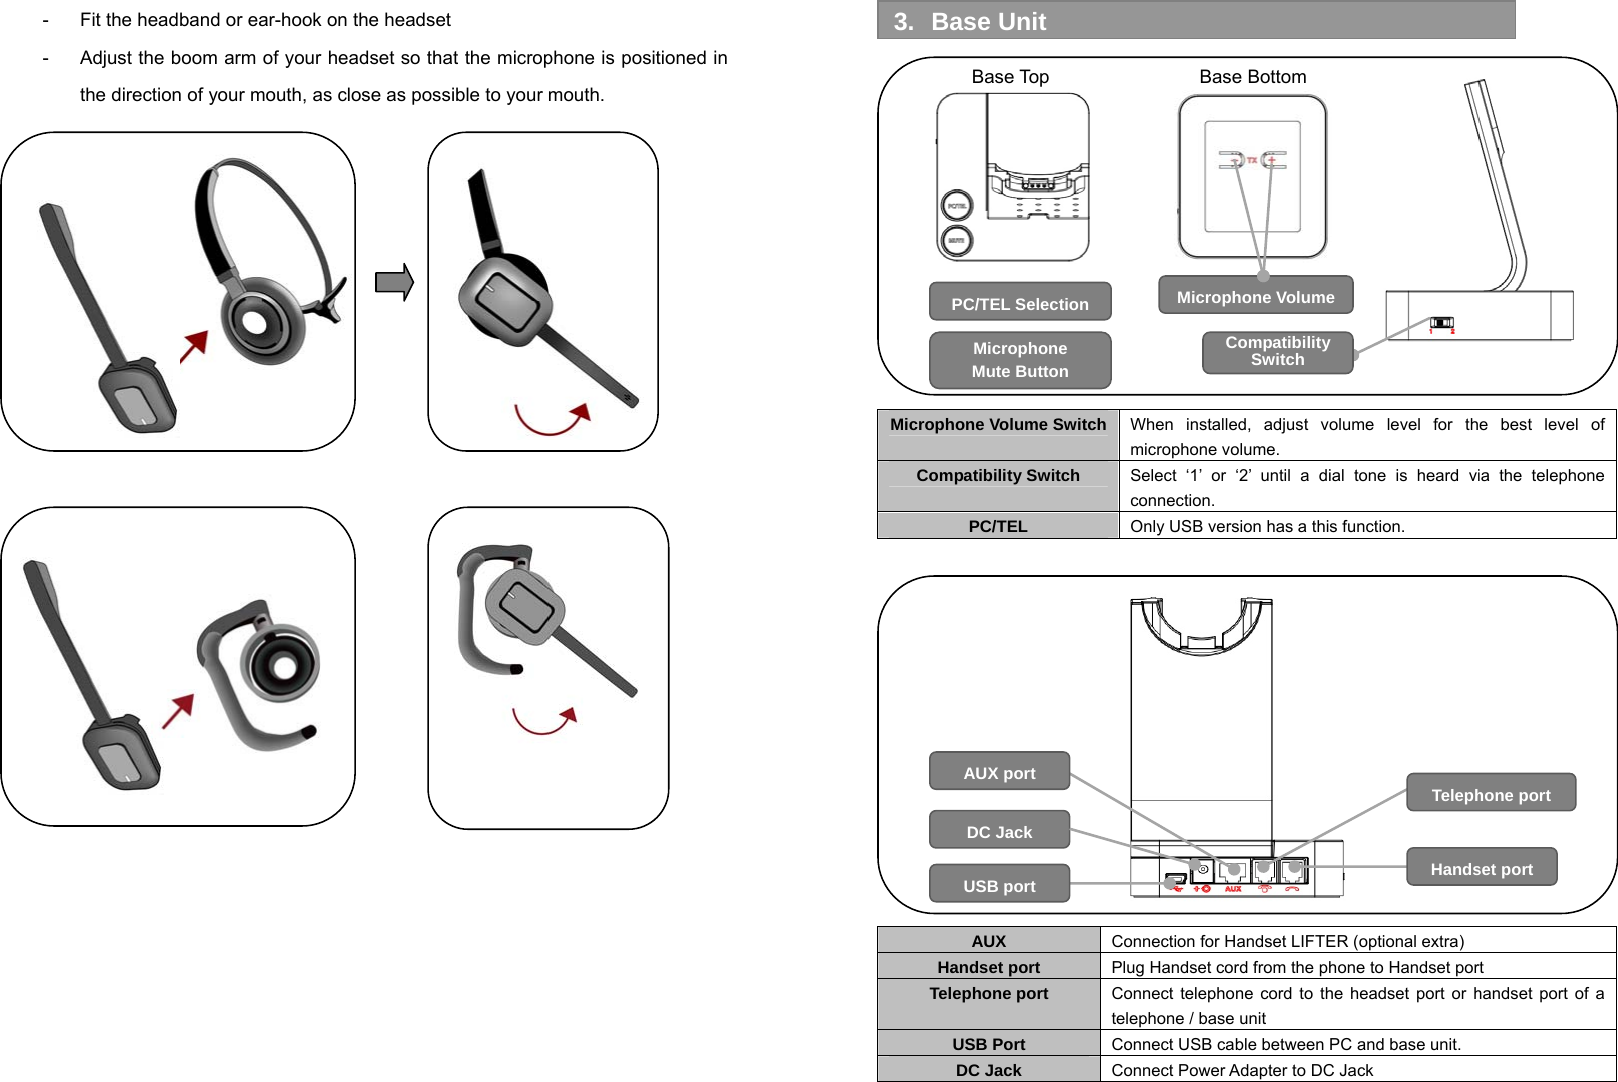 -  Fit the headband or ear-hook on the headset -  Adjust the boom arm of your headset so that the microphone is positioned in the direction of your mouth, as close as possible to your mouth.                                           Base Top                Base Bottom          Microphone Volume Switch When installed, adjust volume level for the best level of microphone volume. Compatibility Switch  Select ‘1’ or ‘2’ until a dial tone is heard via the telephone connection. PC/TEL  Only USB version has a this function.            AUX  Connection for Handset LIFTER (optional extra) Handset port  Plug Handset cord from the phone to Handset port Telephone port  Connect telephone cord to the headset port or handset port of a telephone / base unit USB Port  Connect USB cable between PC and base unit. DC Jack  Connect Power Adapter to DC Jack  3. Base Unit PC/TEL Selection USB port AUX port Handset port Telephone port DC Jack Compatibility  Switch  Microphone  Mute Button Microphone Volume